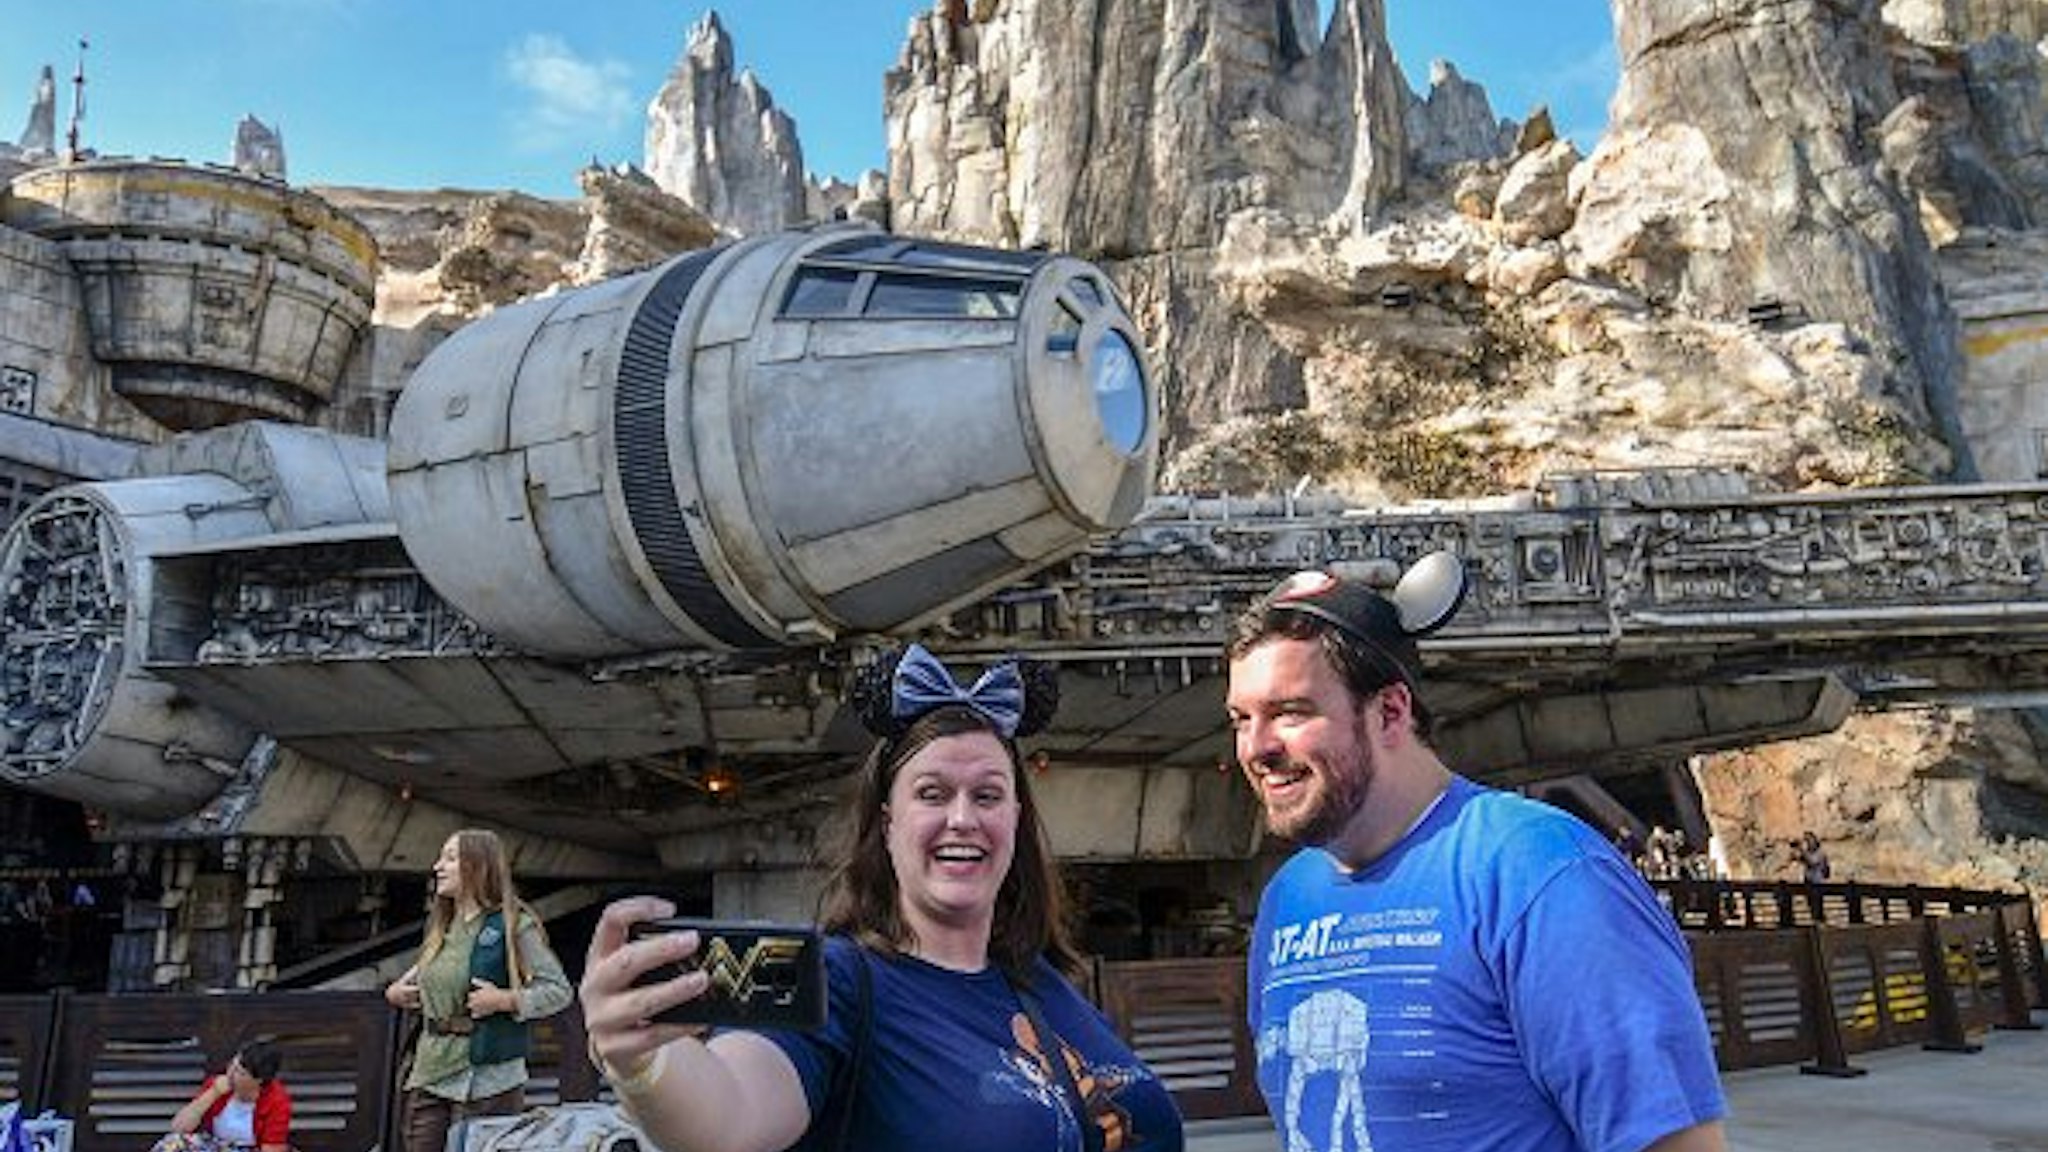 Nycole Tylka, and her brother, Nate Tylka take selfies in front of the Millennium Falcon on opening day at Star Wars: Galaxy"u2019s Edge at Disneyland in Anaheim, CA, on Friday, May 31, 2019